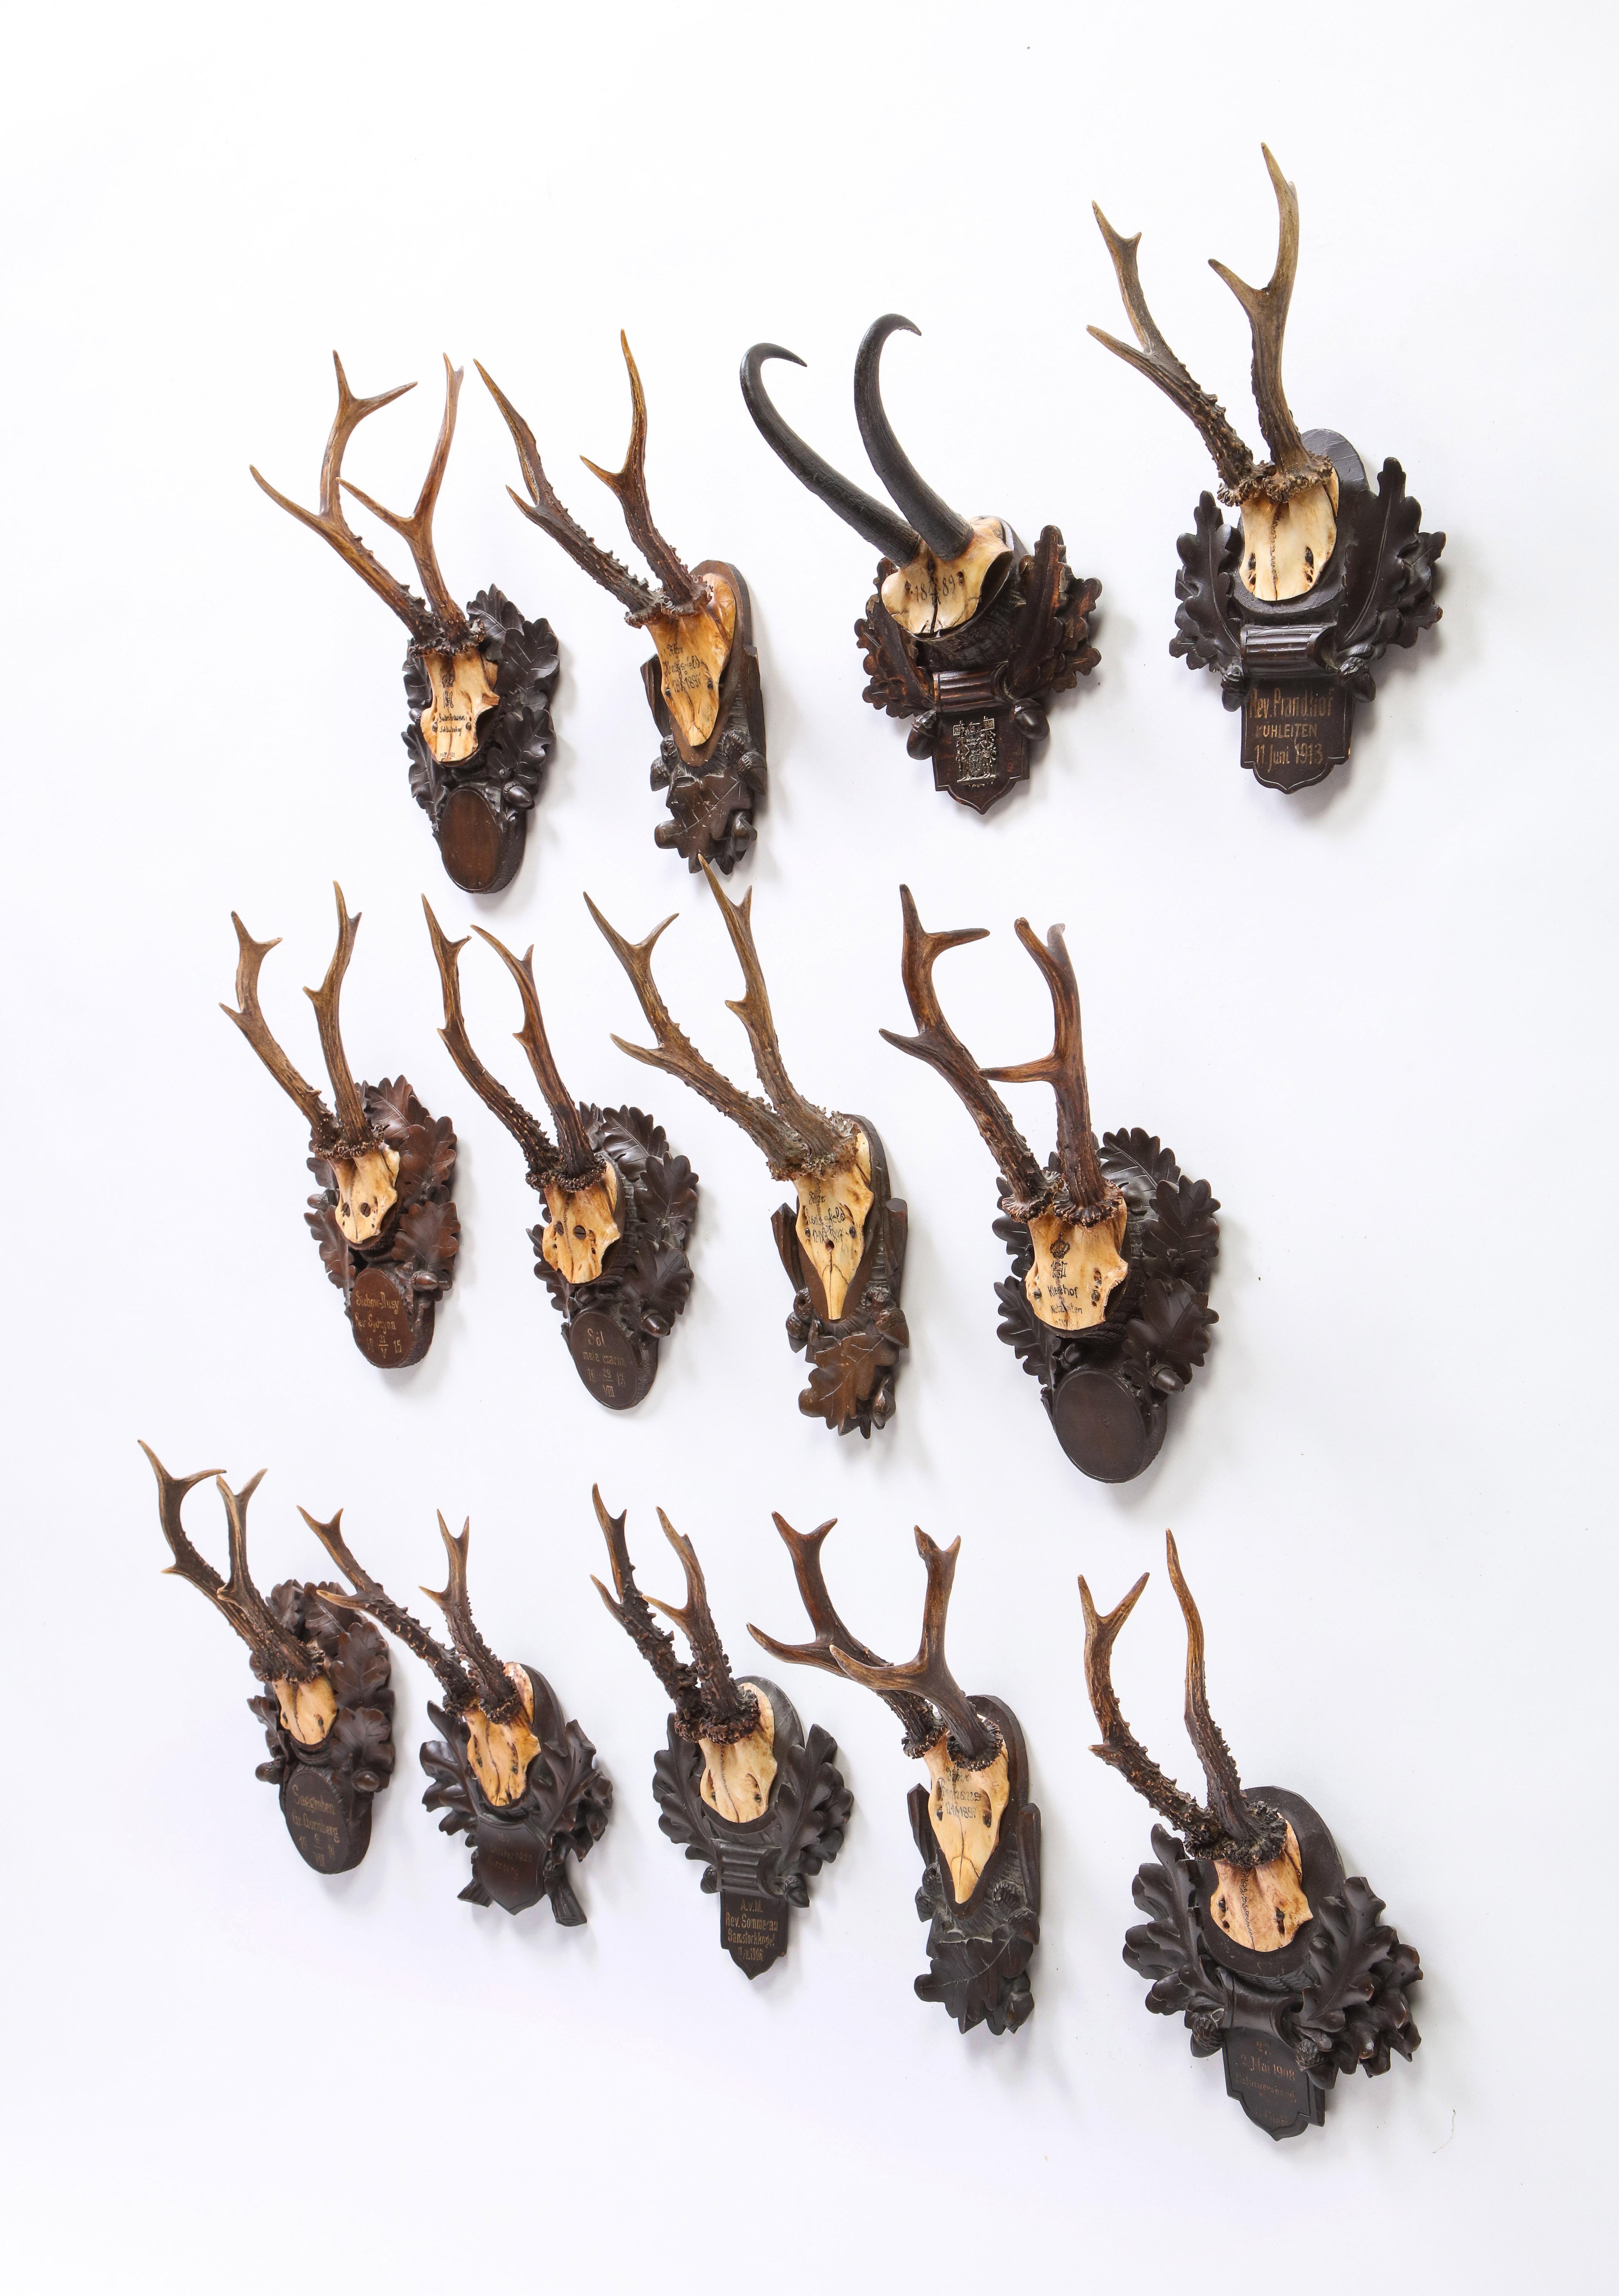 This group of thirteen Roe Deer antlers trophy mounts date from the late 1800s to 20th century. Each set of antlers is mounted on wooden boards carved with oak leaves and acorns, and inscribed with the date and location of the hunt. The Roe Deer or